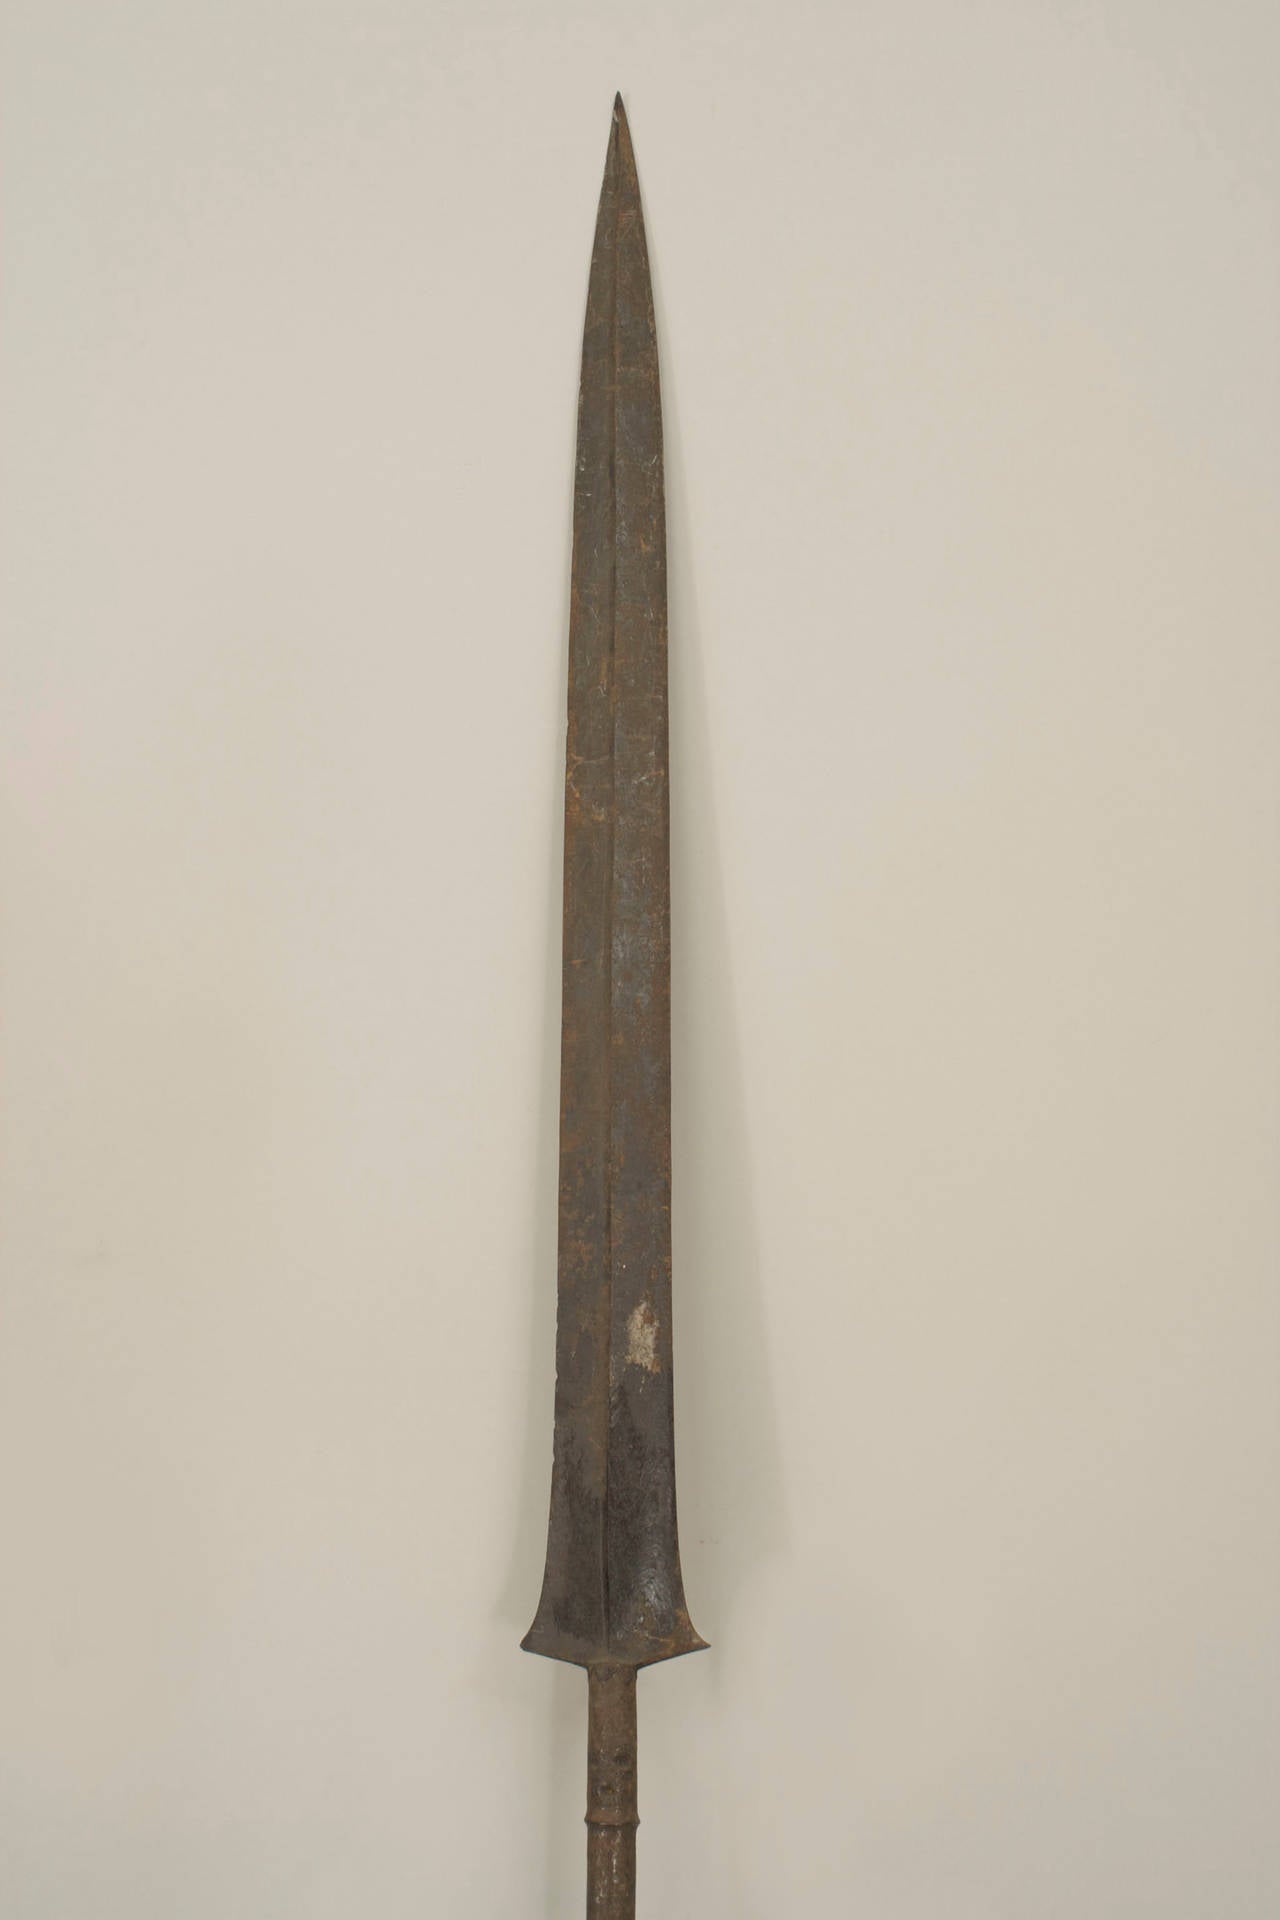 English Renaissance-style spear with a wooden shaft and simple 29-inch iron blade.
